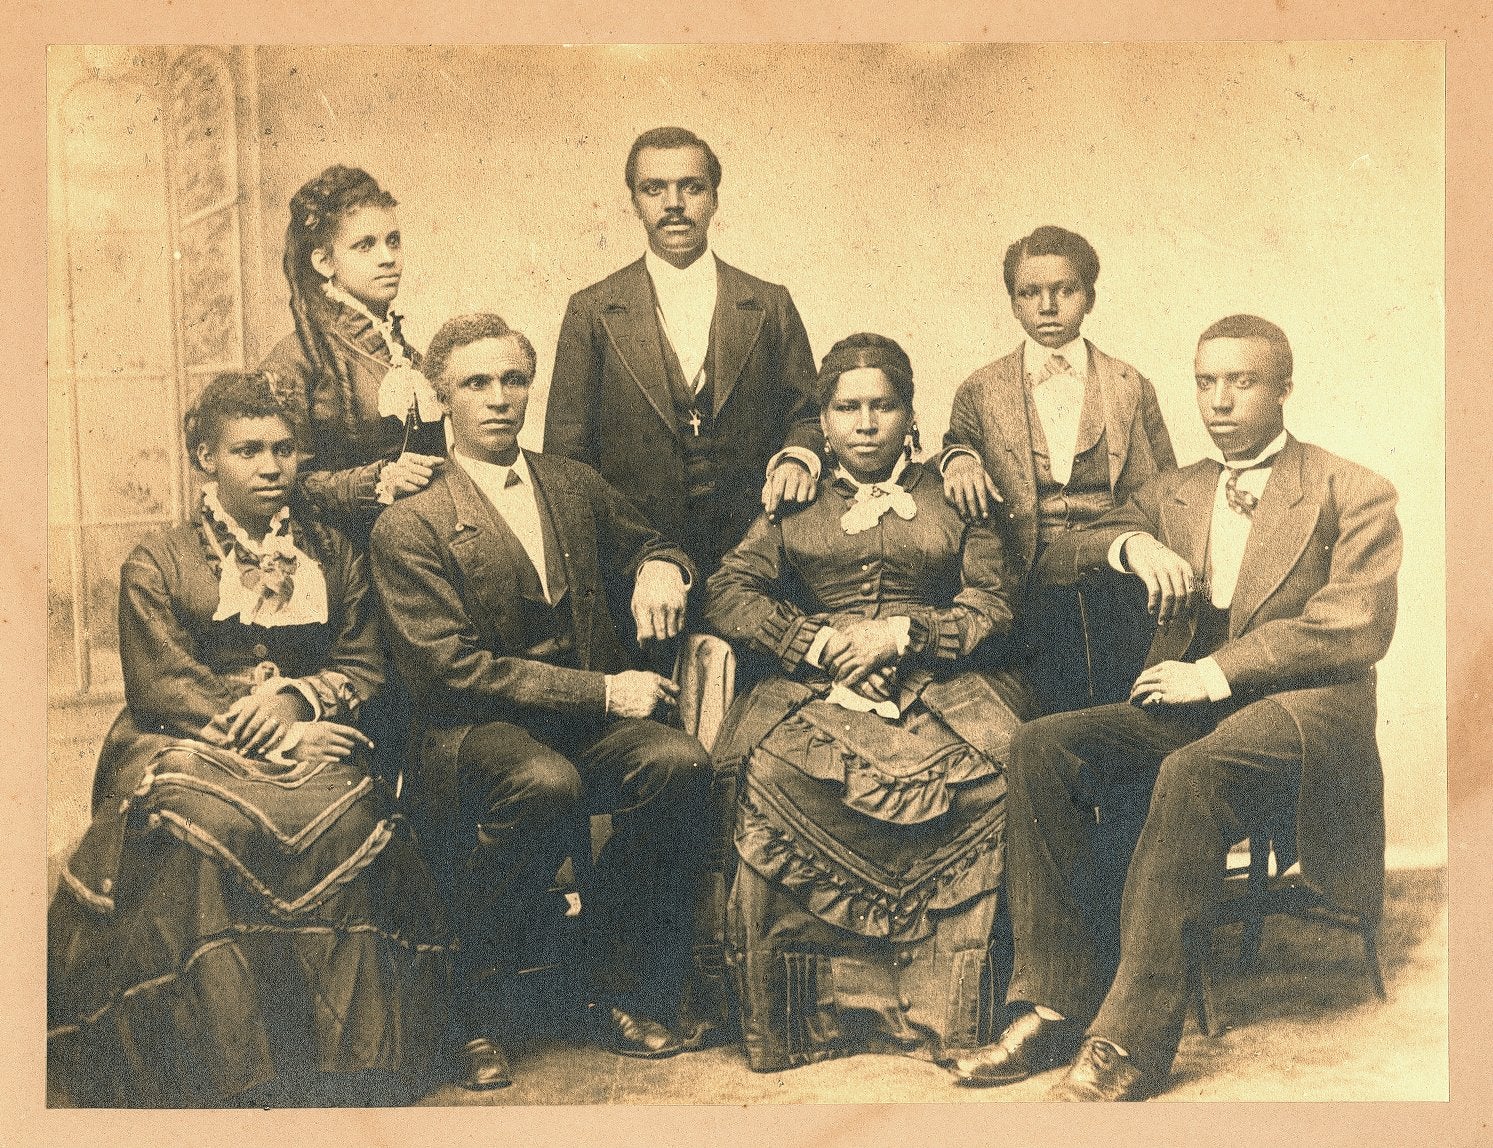 Mossell family, c. 1875